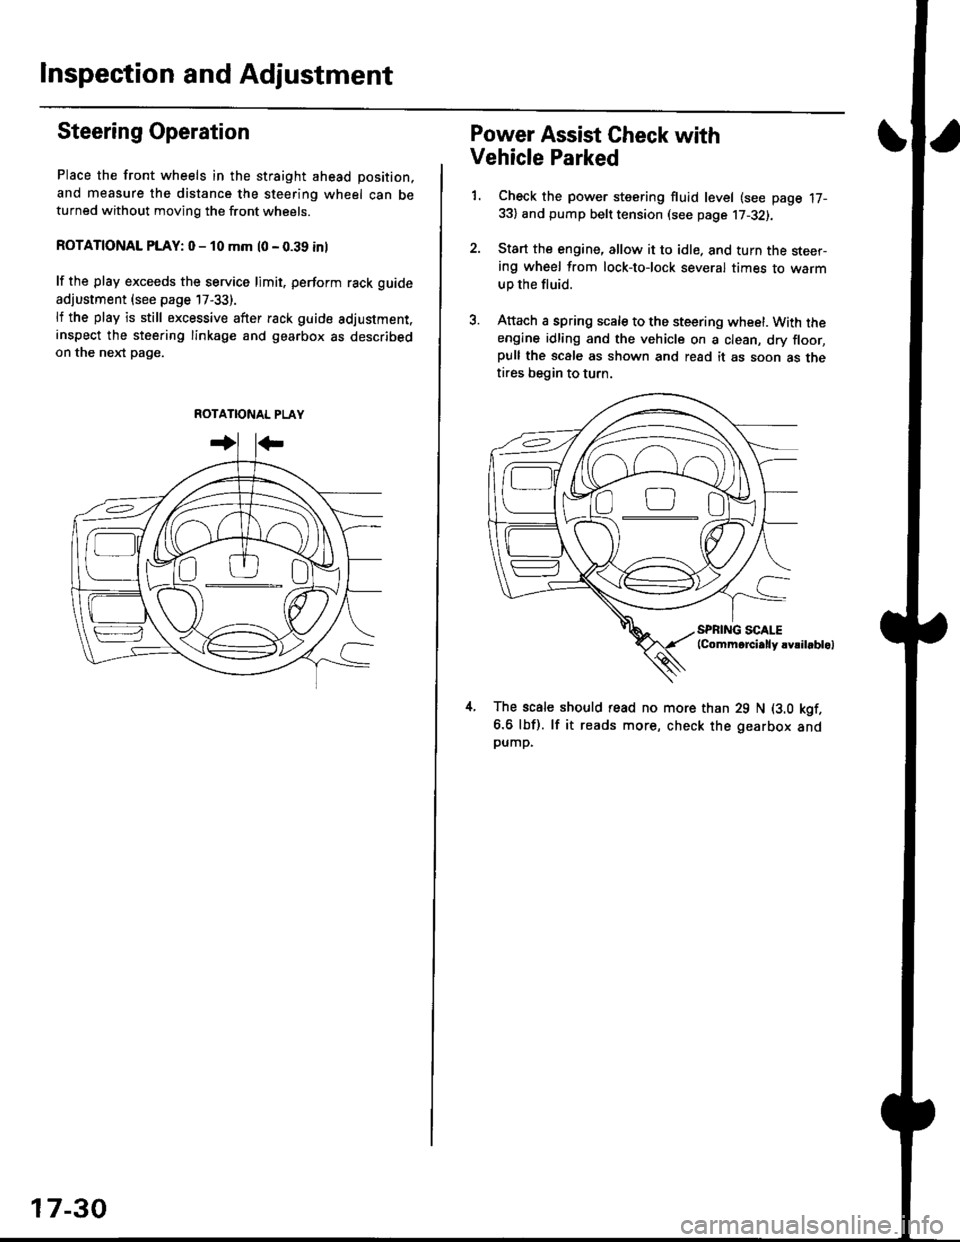 HONDA CIVIC 2000 6.G Service Manual Inspection and Adjustment
Steering Operation
Place the front wheels in the straight ahead position,
and measure the distance the steering wheel can beturned without moving the front wheels.
ROTATIONAL